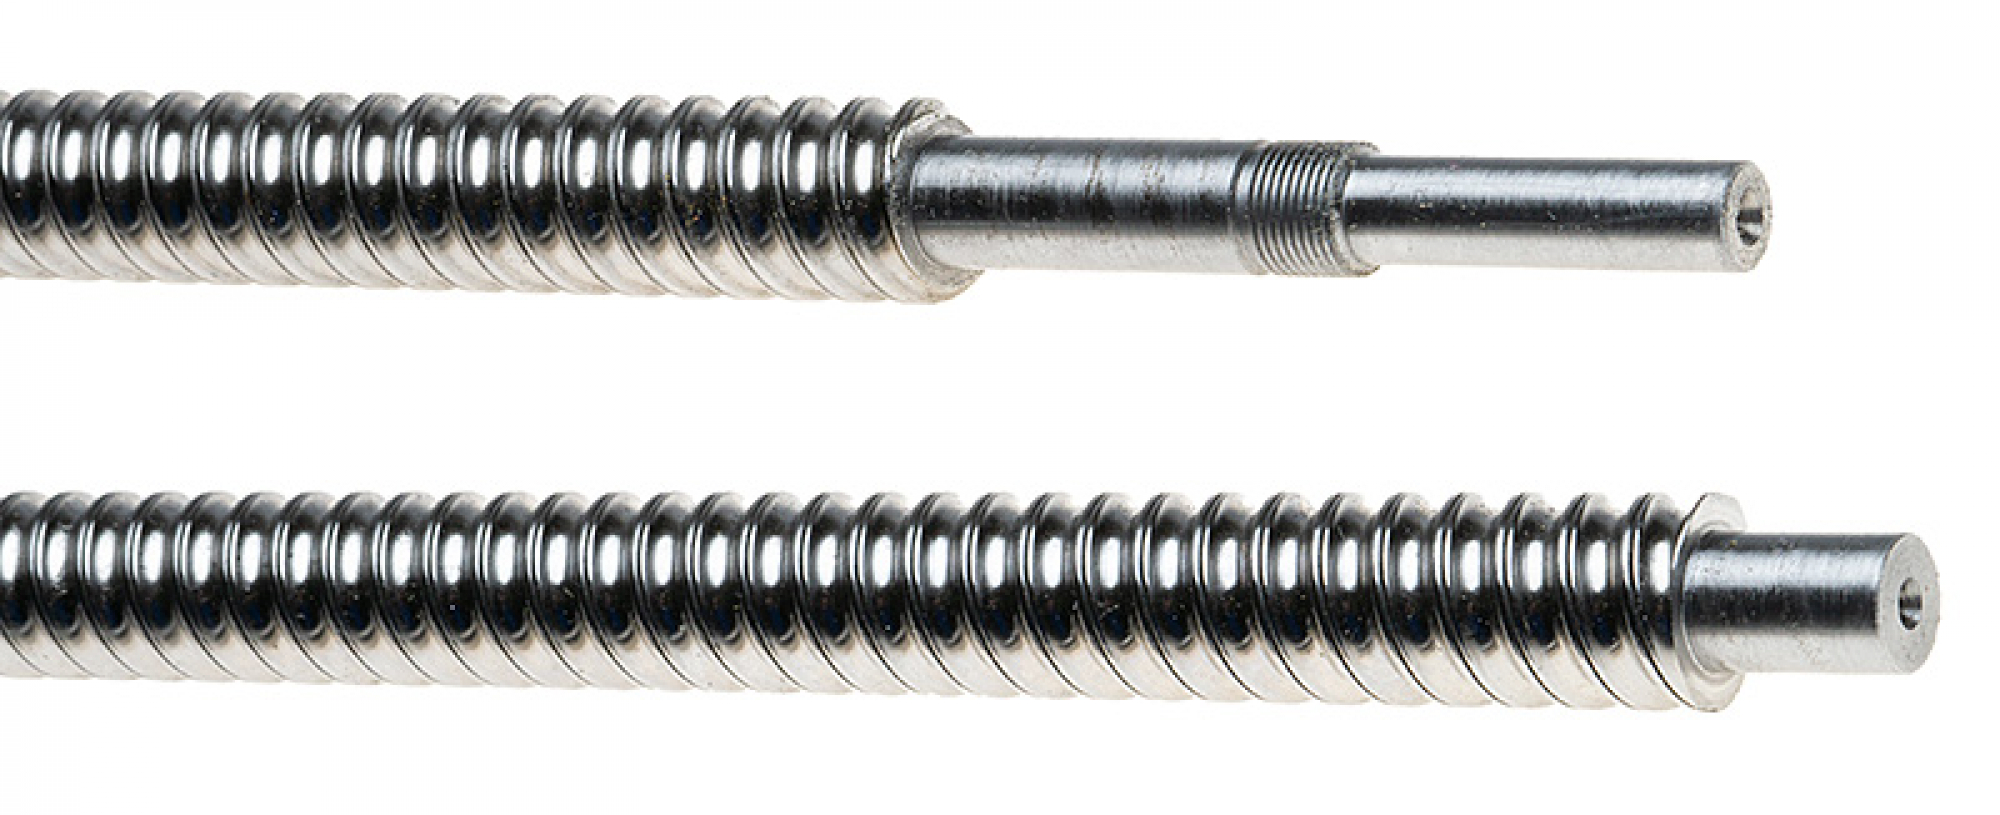 Ball screw spindle 25 x 10 Length: 1920 mm